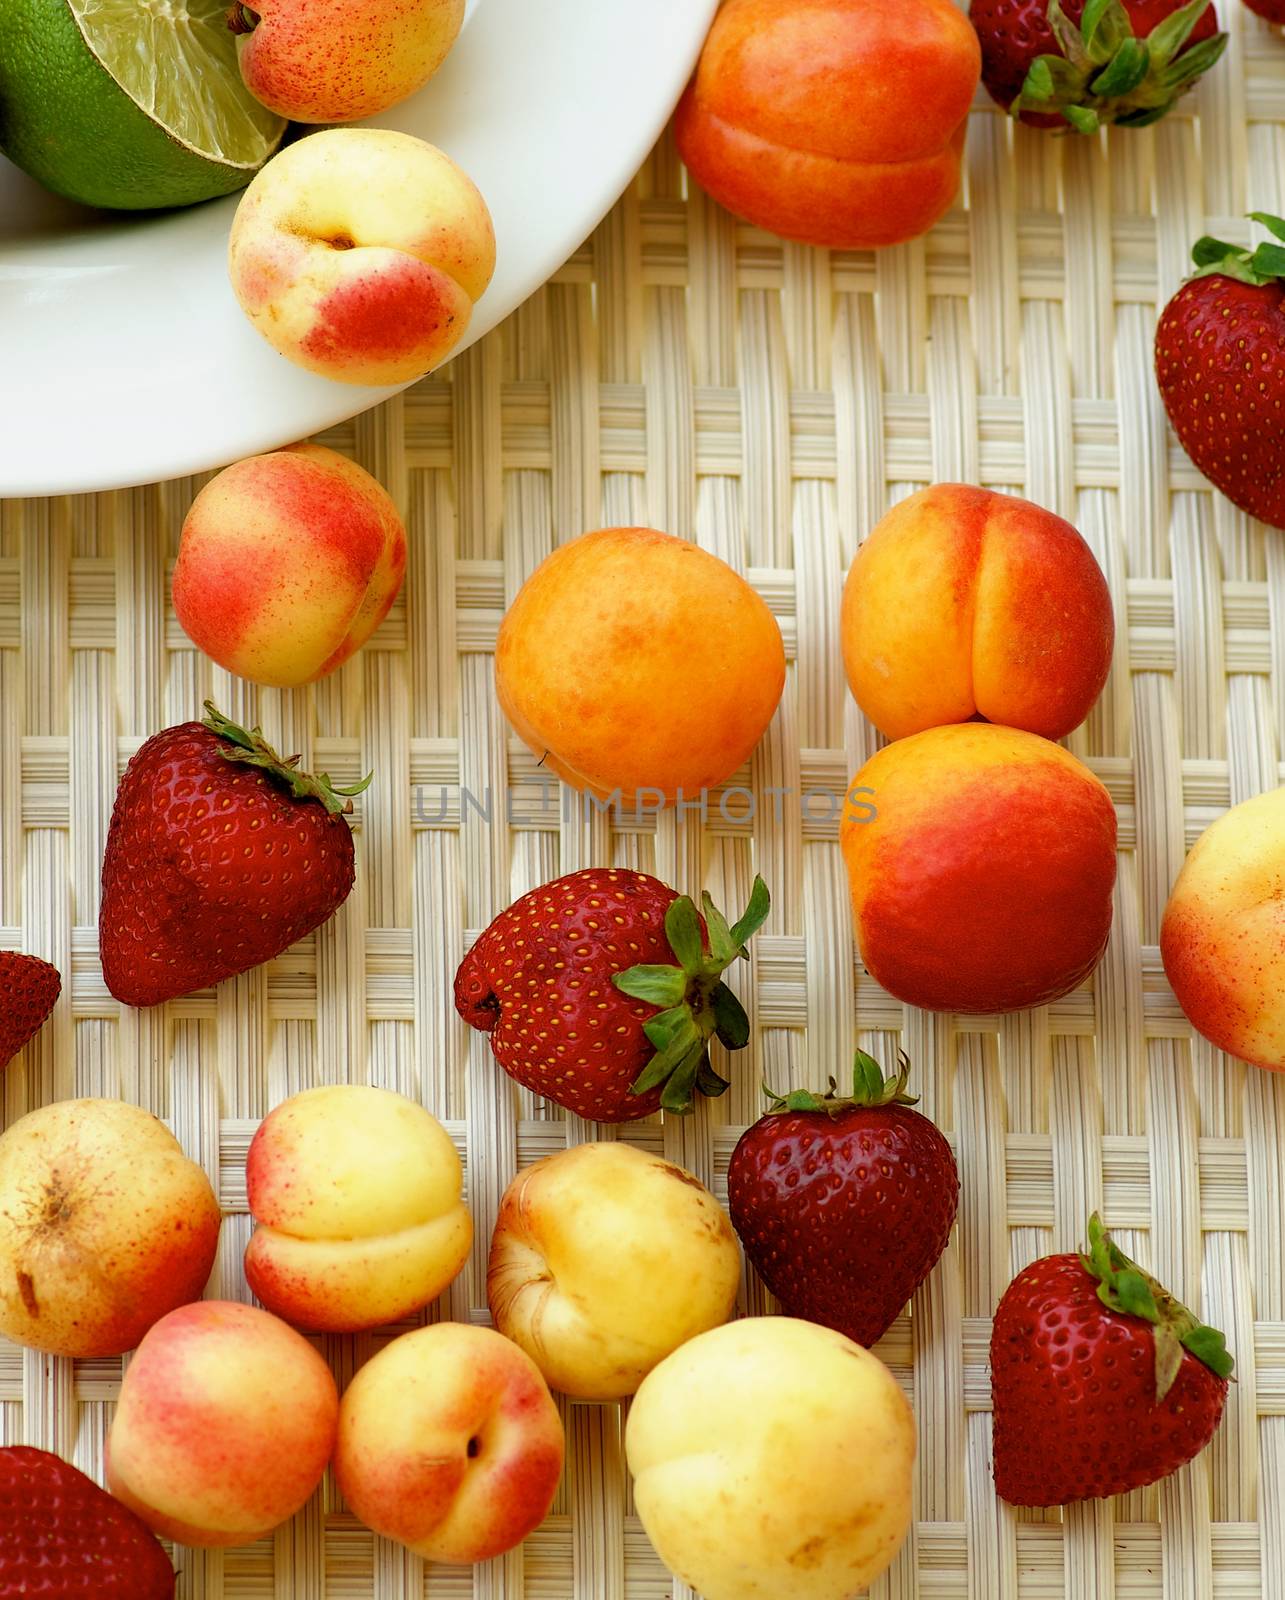 Arrangement of Various Summer Fruits with Ripe Apricots, Strawberries, Peaches, Nectarines and Lime closeup on Wicker background. Top View